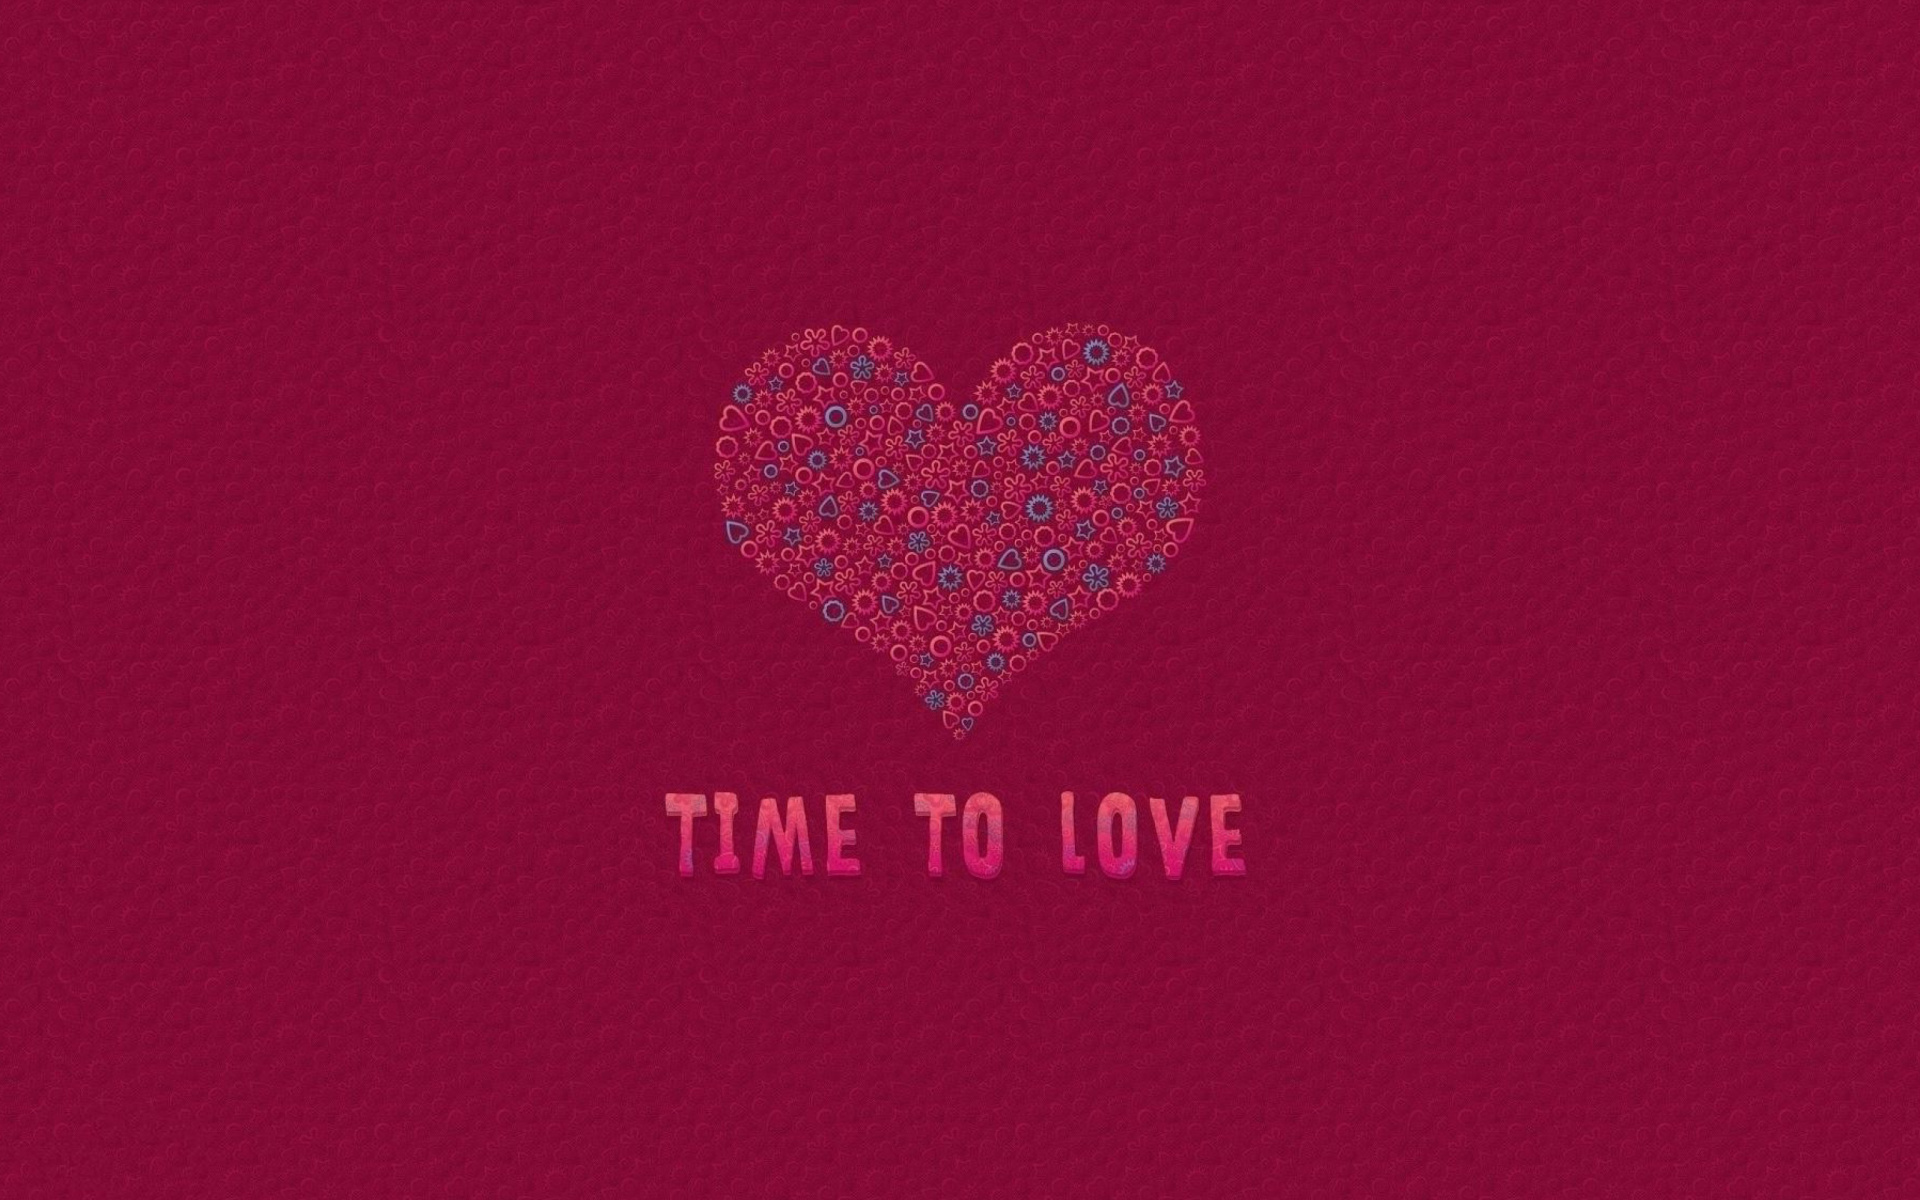 Time to Love wallpaper 1920x1200